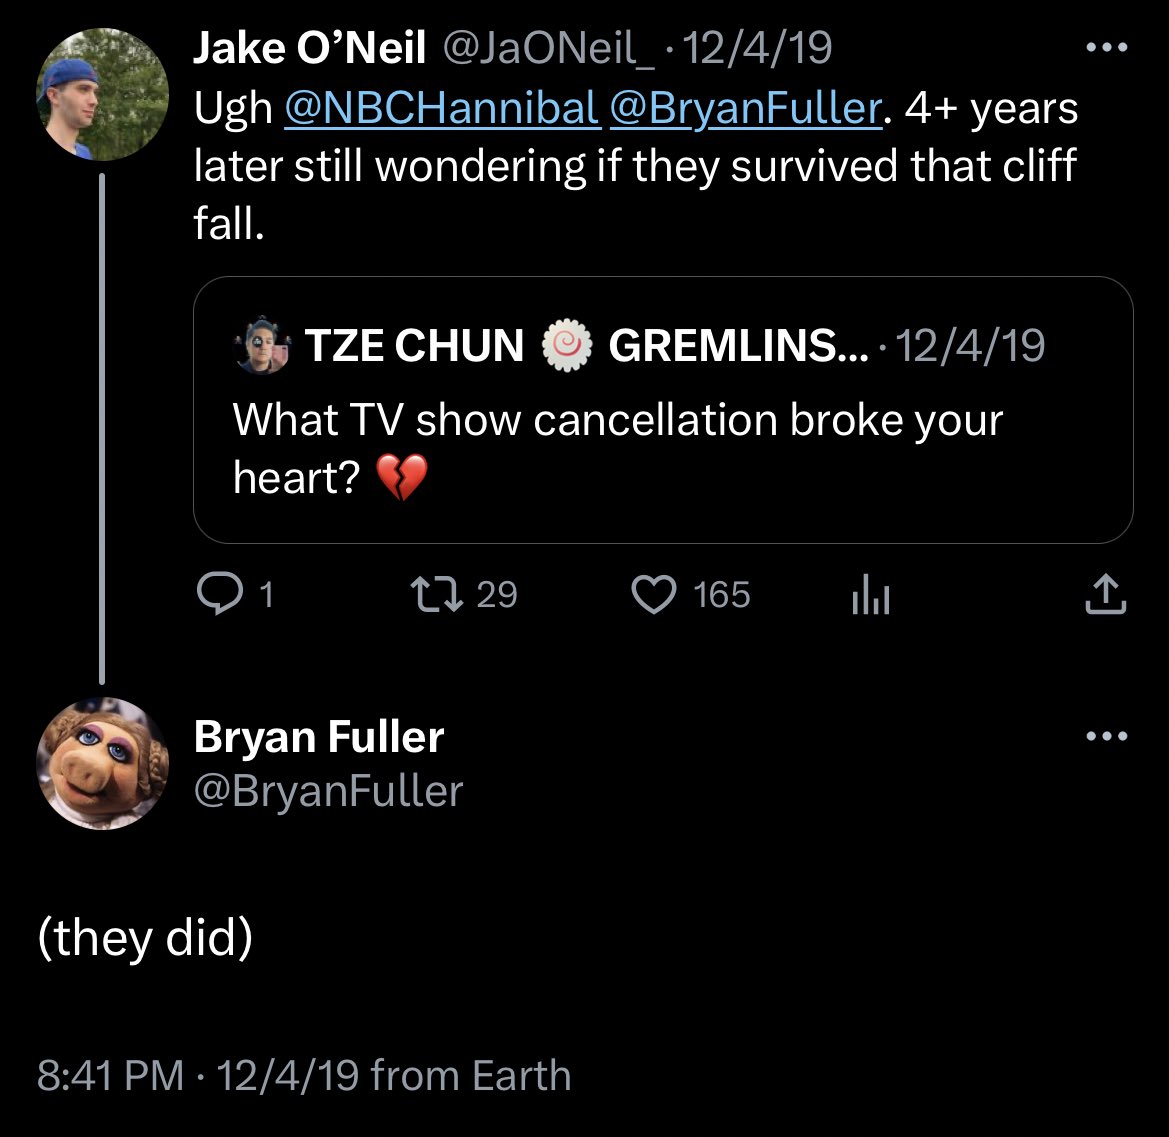 every now and then i remember Bryan Fuller confirmed Hannibal and Will survived the fall